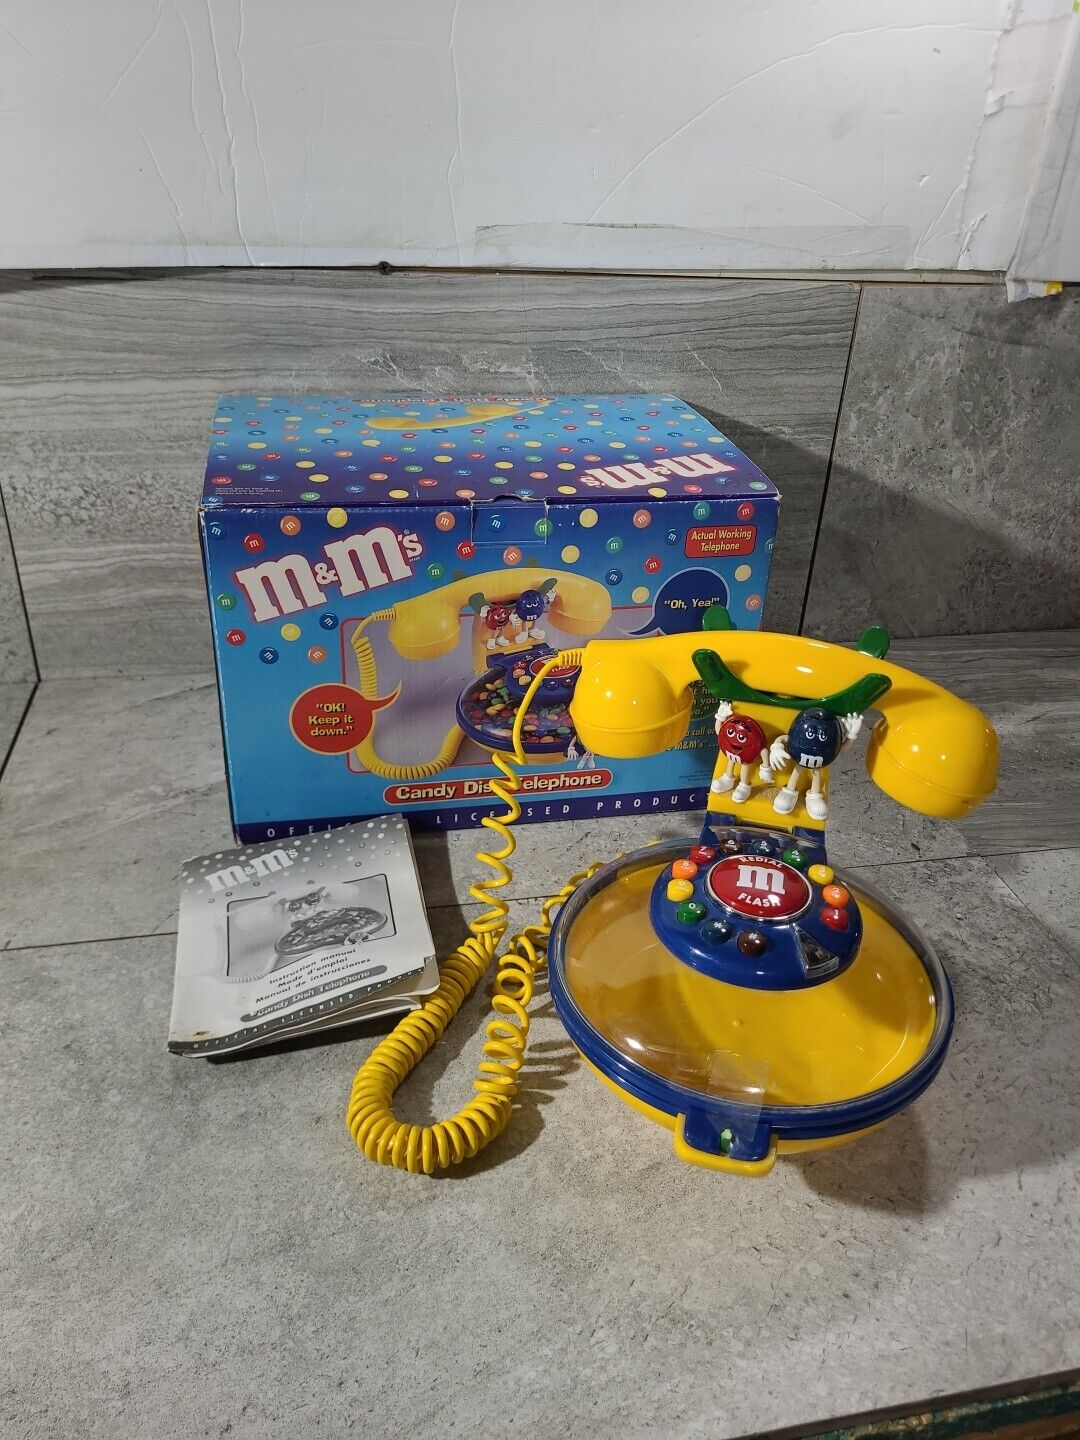 CIB M&M Candy Dish Telephone Mars Talks Collectible tested works W Box Vtg Phone